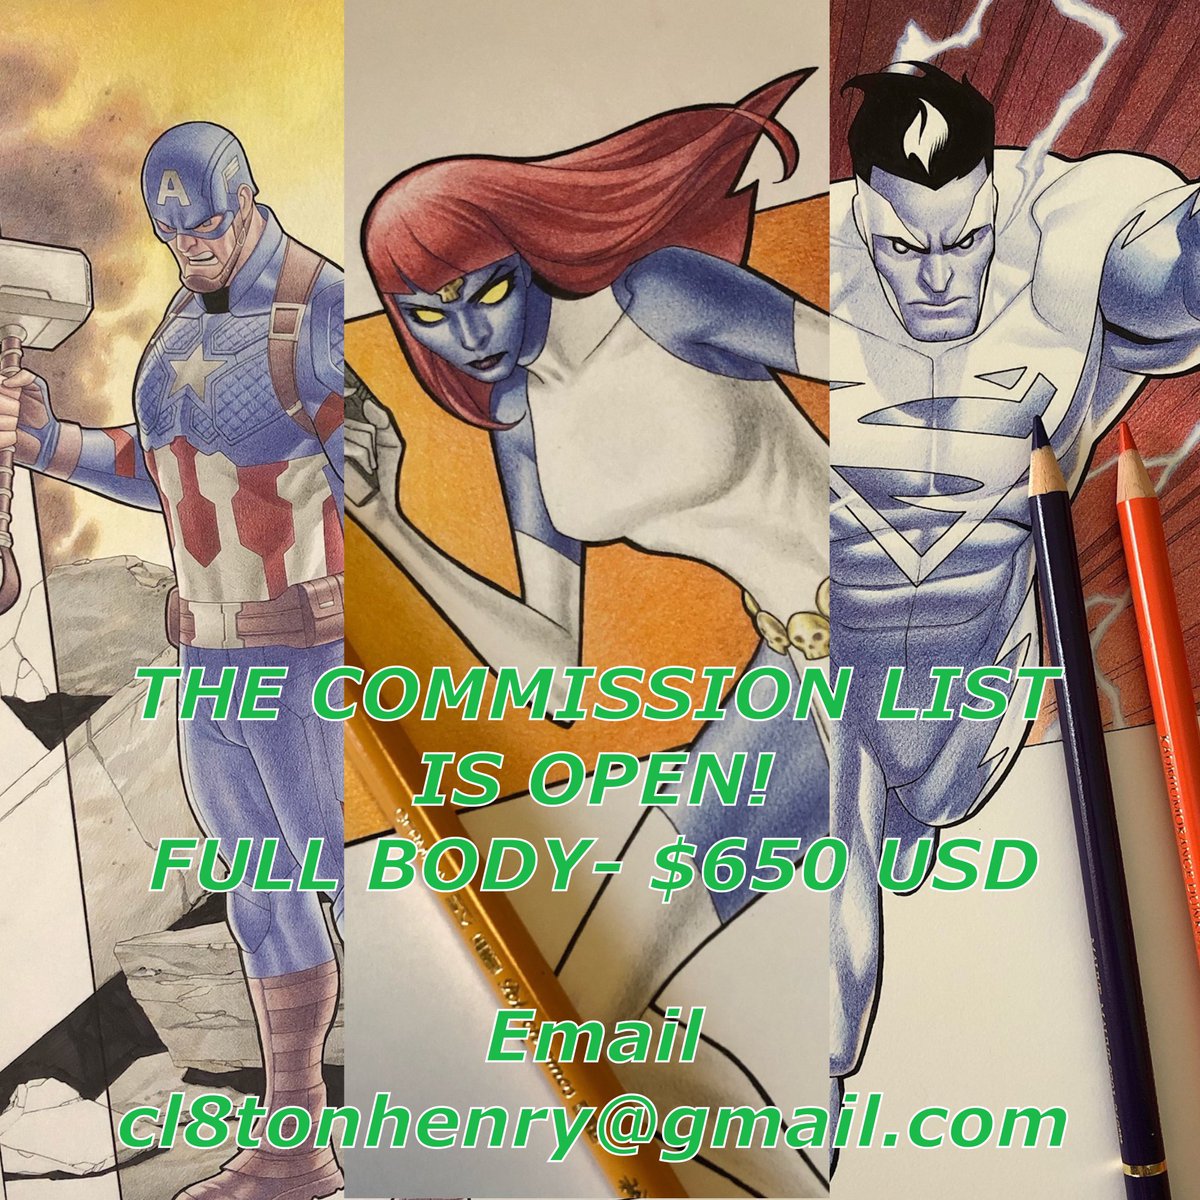 NYCC is only two months away! Here’s your chance to get a colored pencil commission!